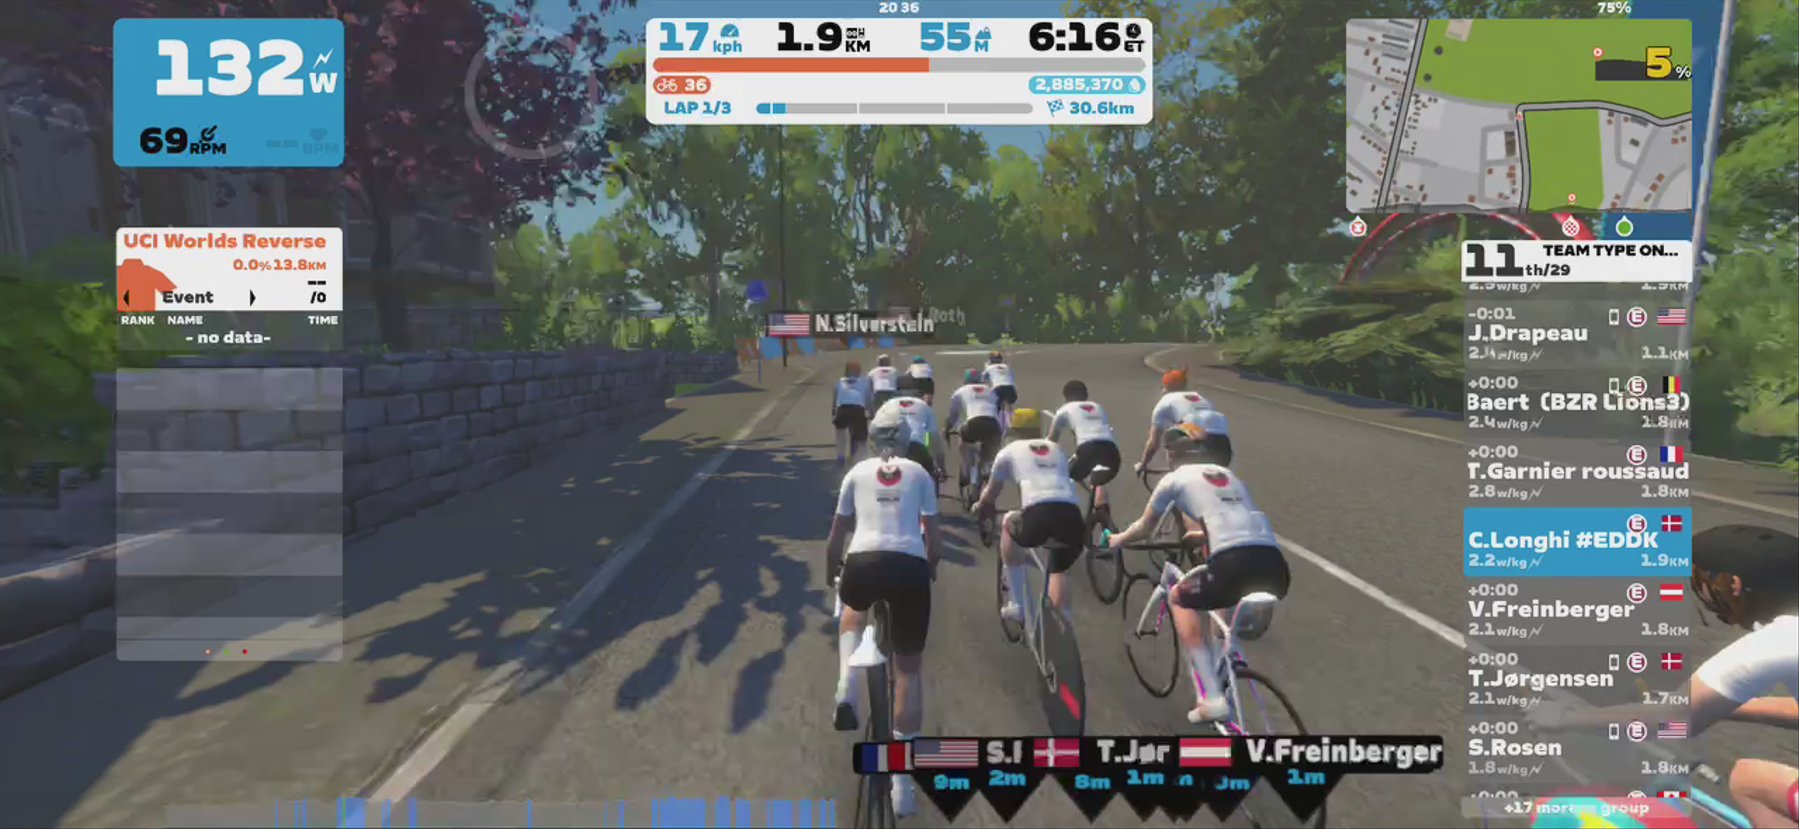 Zwift - Group Ride: TEAM TYPE ONE STYLE Friday Fun Social Ride  (E) on Tour Of Tewit Well in Yorkshire